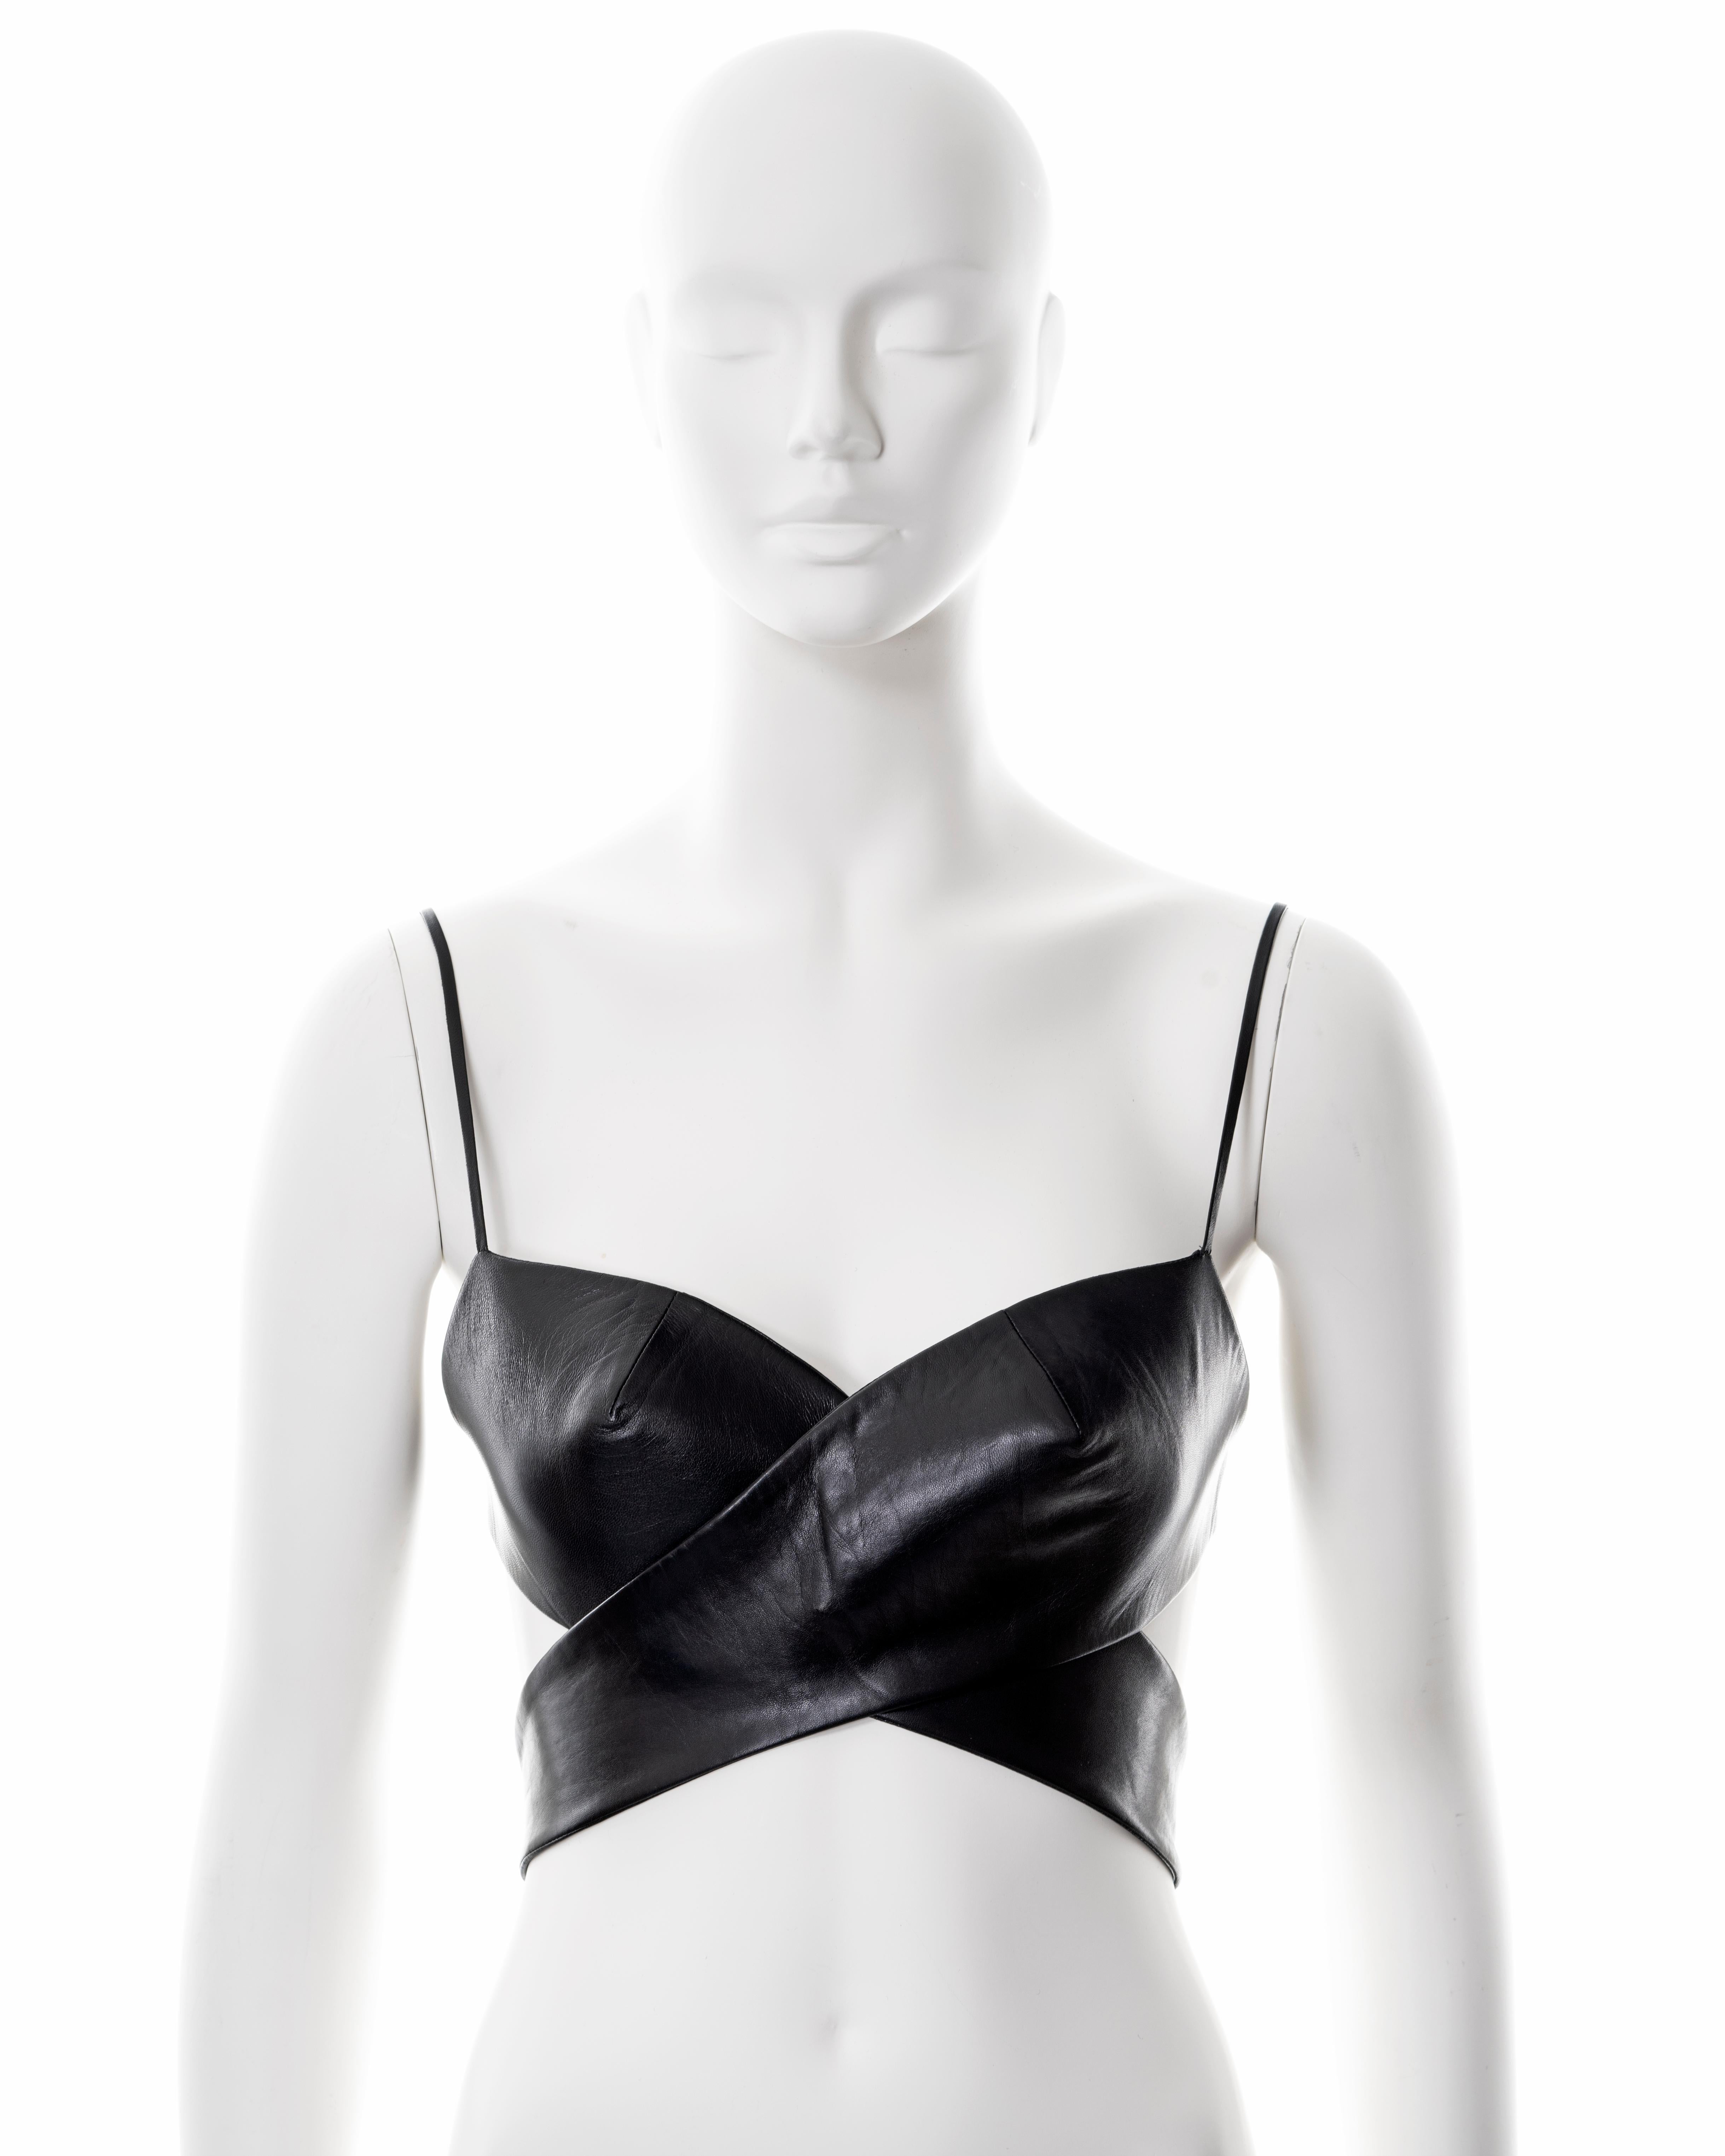 ▪ Gucci black leather bra top
▪ Designed by Tom Ford
▪ Sold by One of a Kind Archive
▪ Constructed from black lambskin leather 
▪ Consists of two single-cup bras which cross over when worn 
▪ Thin adjustable spaghetti straps with miniature buckles